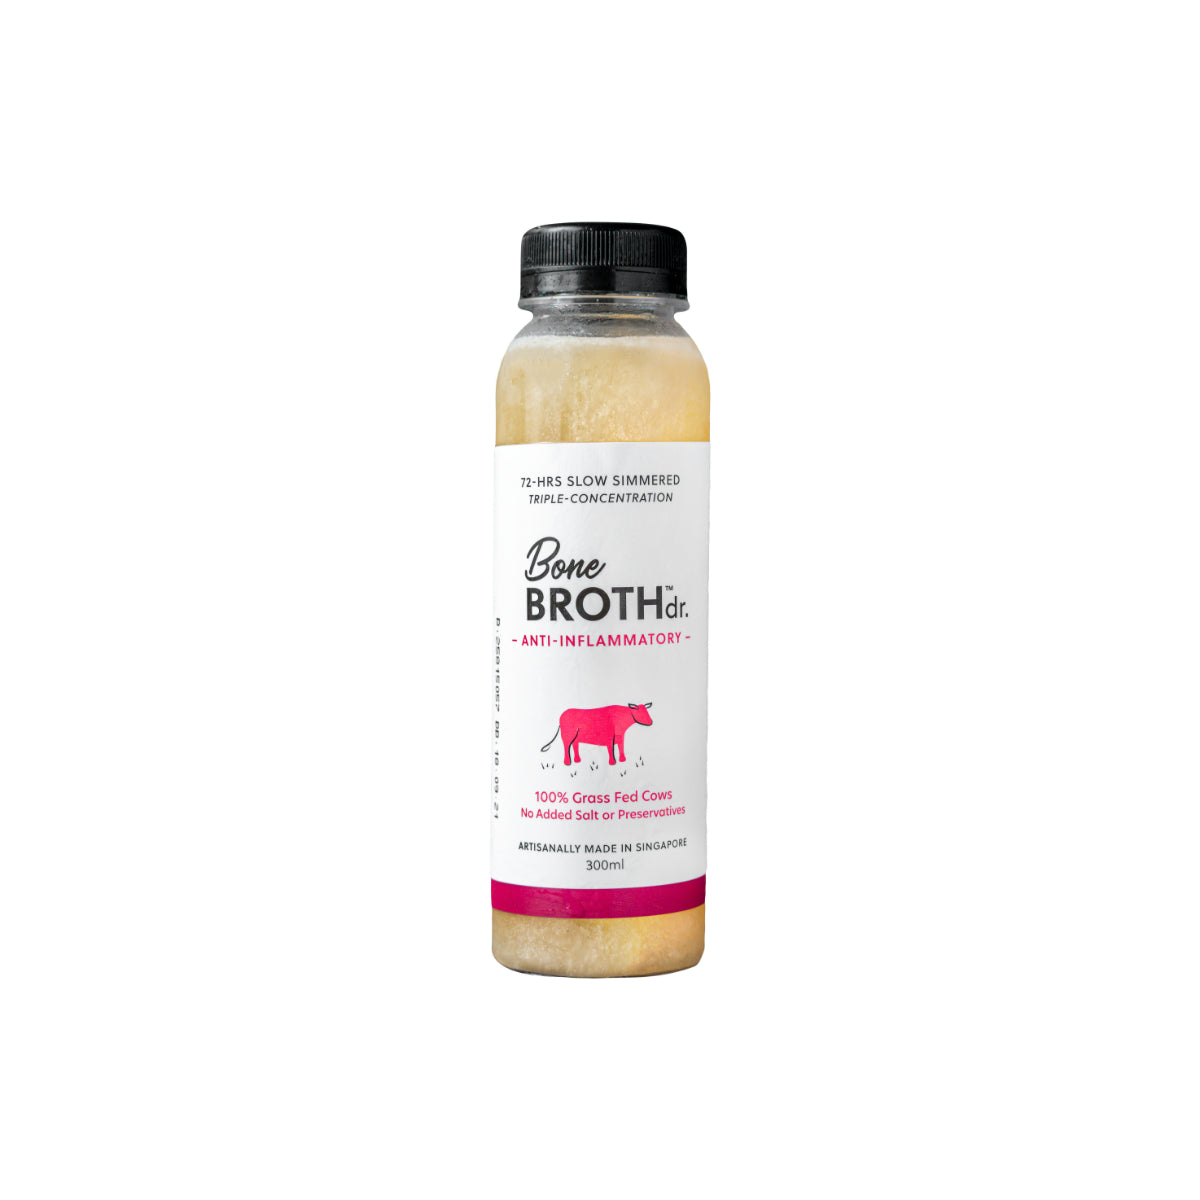 PetCubes Bone Broth Dr for Dogs & Cats - Beef 300ml